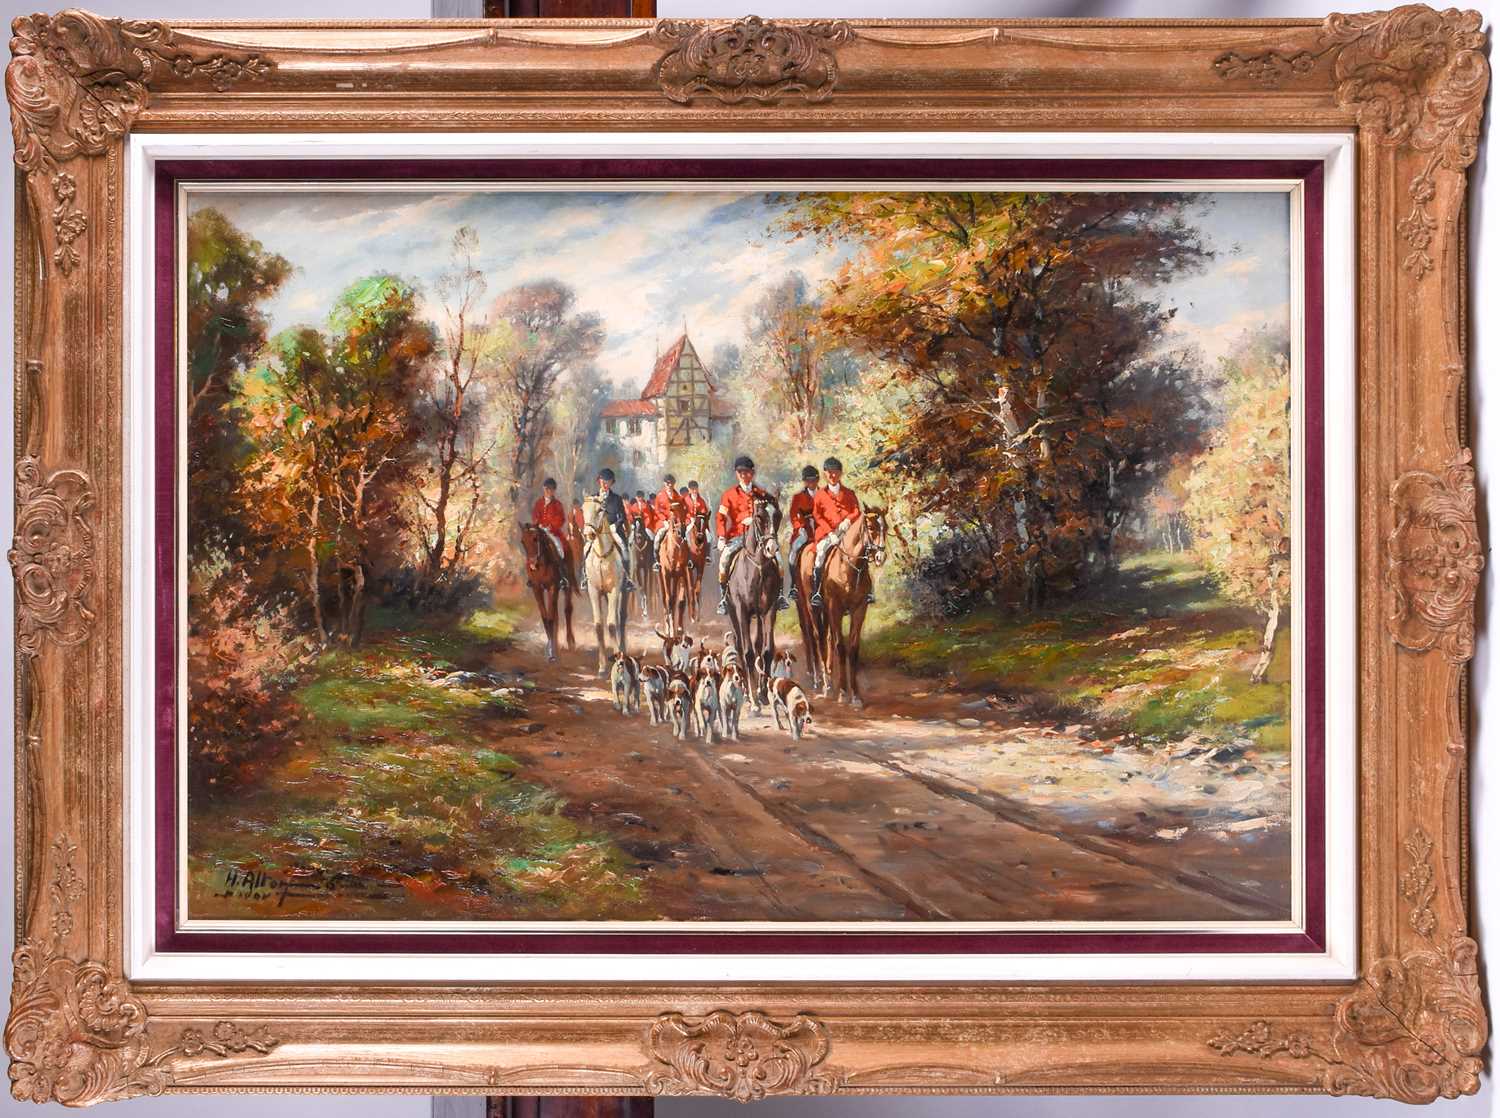 H. Alton? (20th century) fox hunters and hounds in a rural landscape, oil on canvas, 58 cm x 89 cm